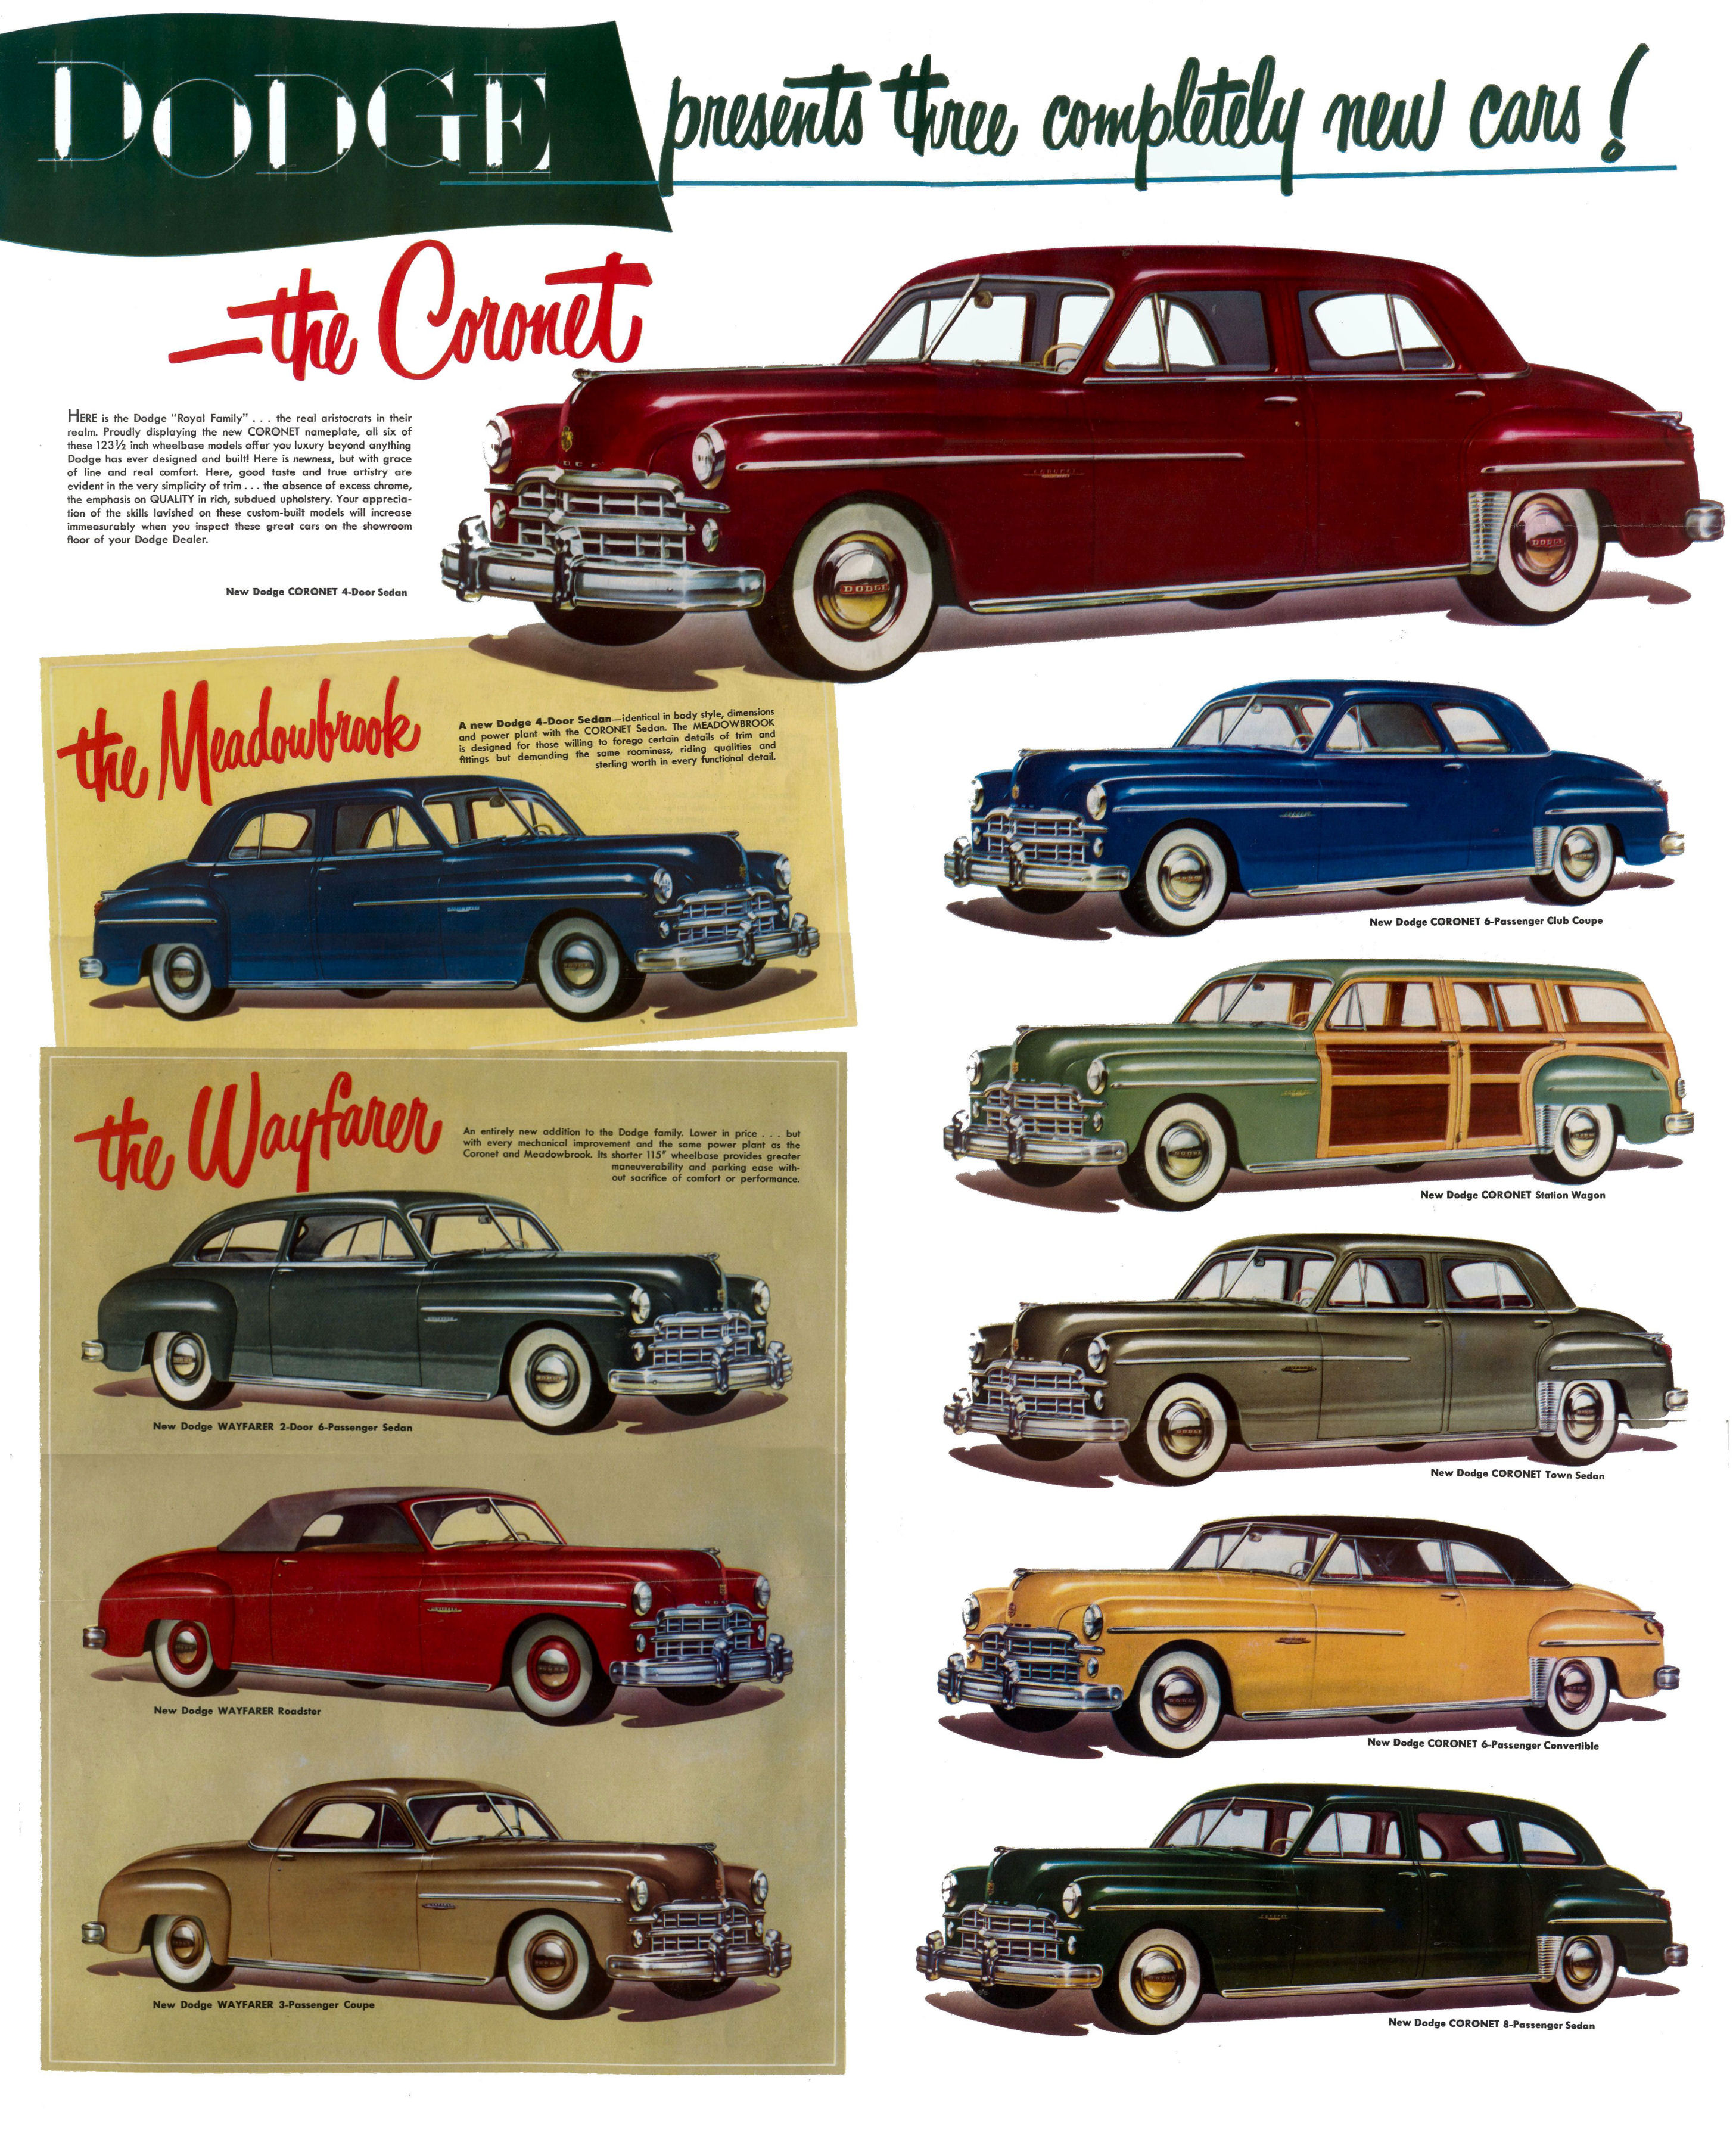 1949_Dodge_Foldout-09_to16